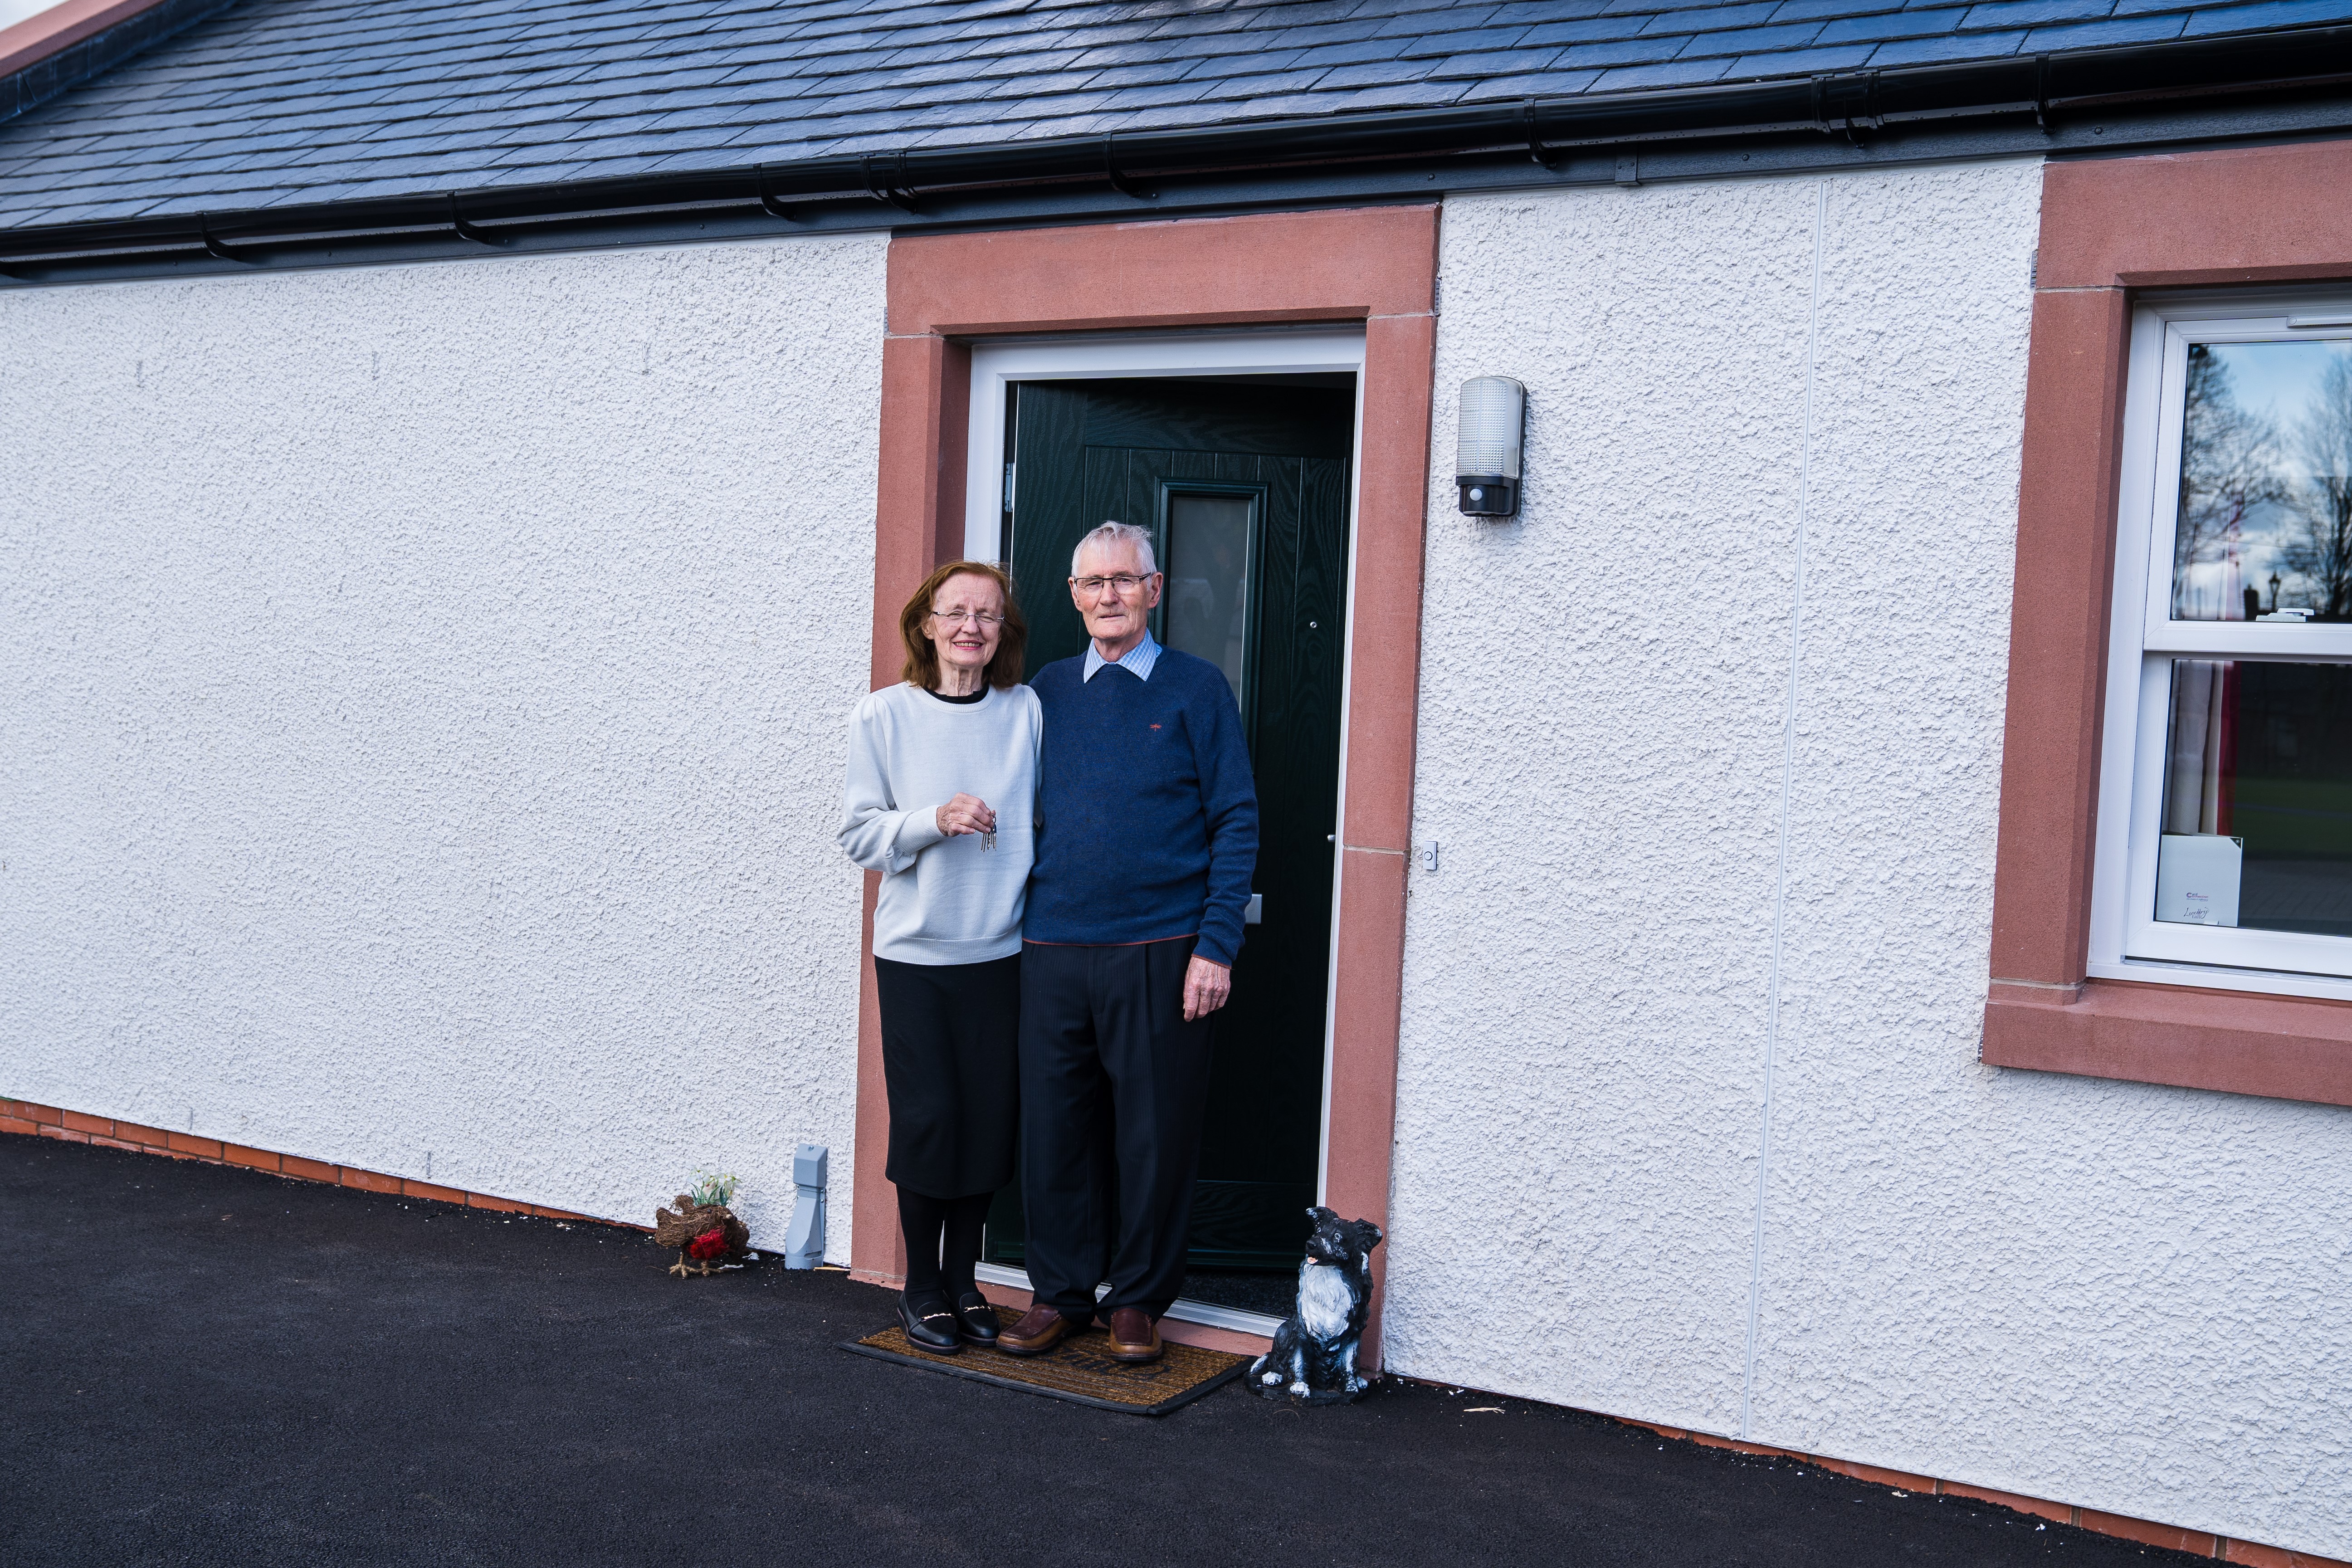 Sanquhar family become first tenants at new DGHP development